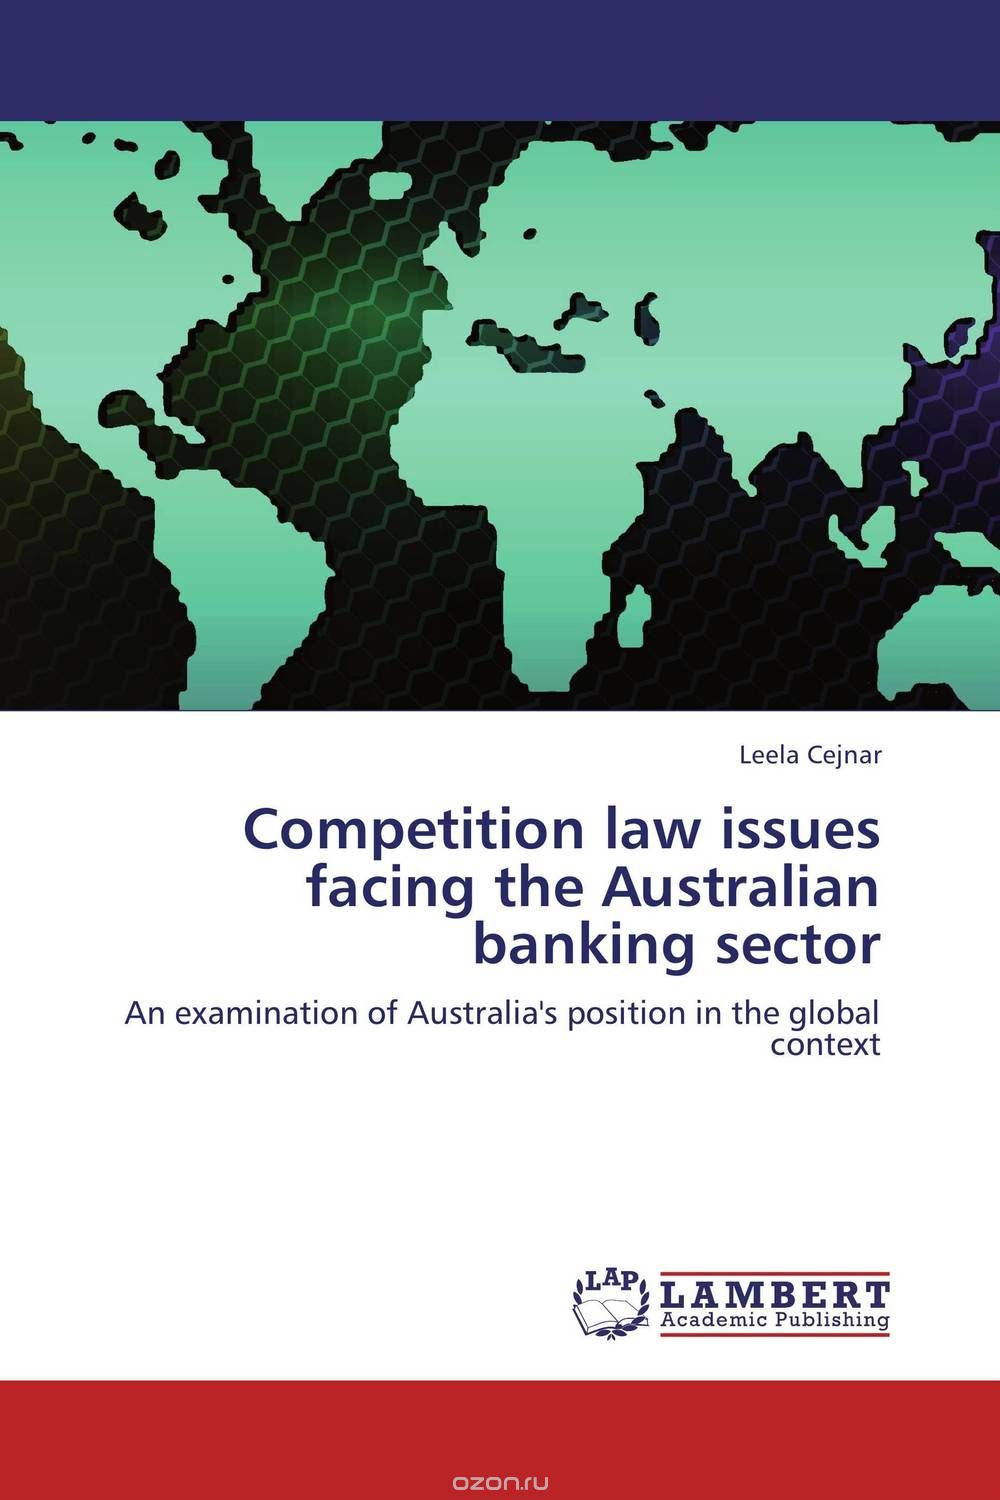 Скачать книгу "Competition law issues facing the Australian banking sector"